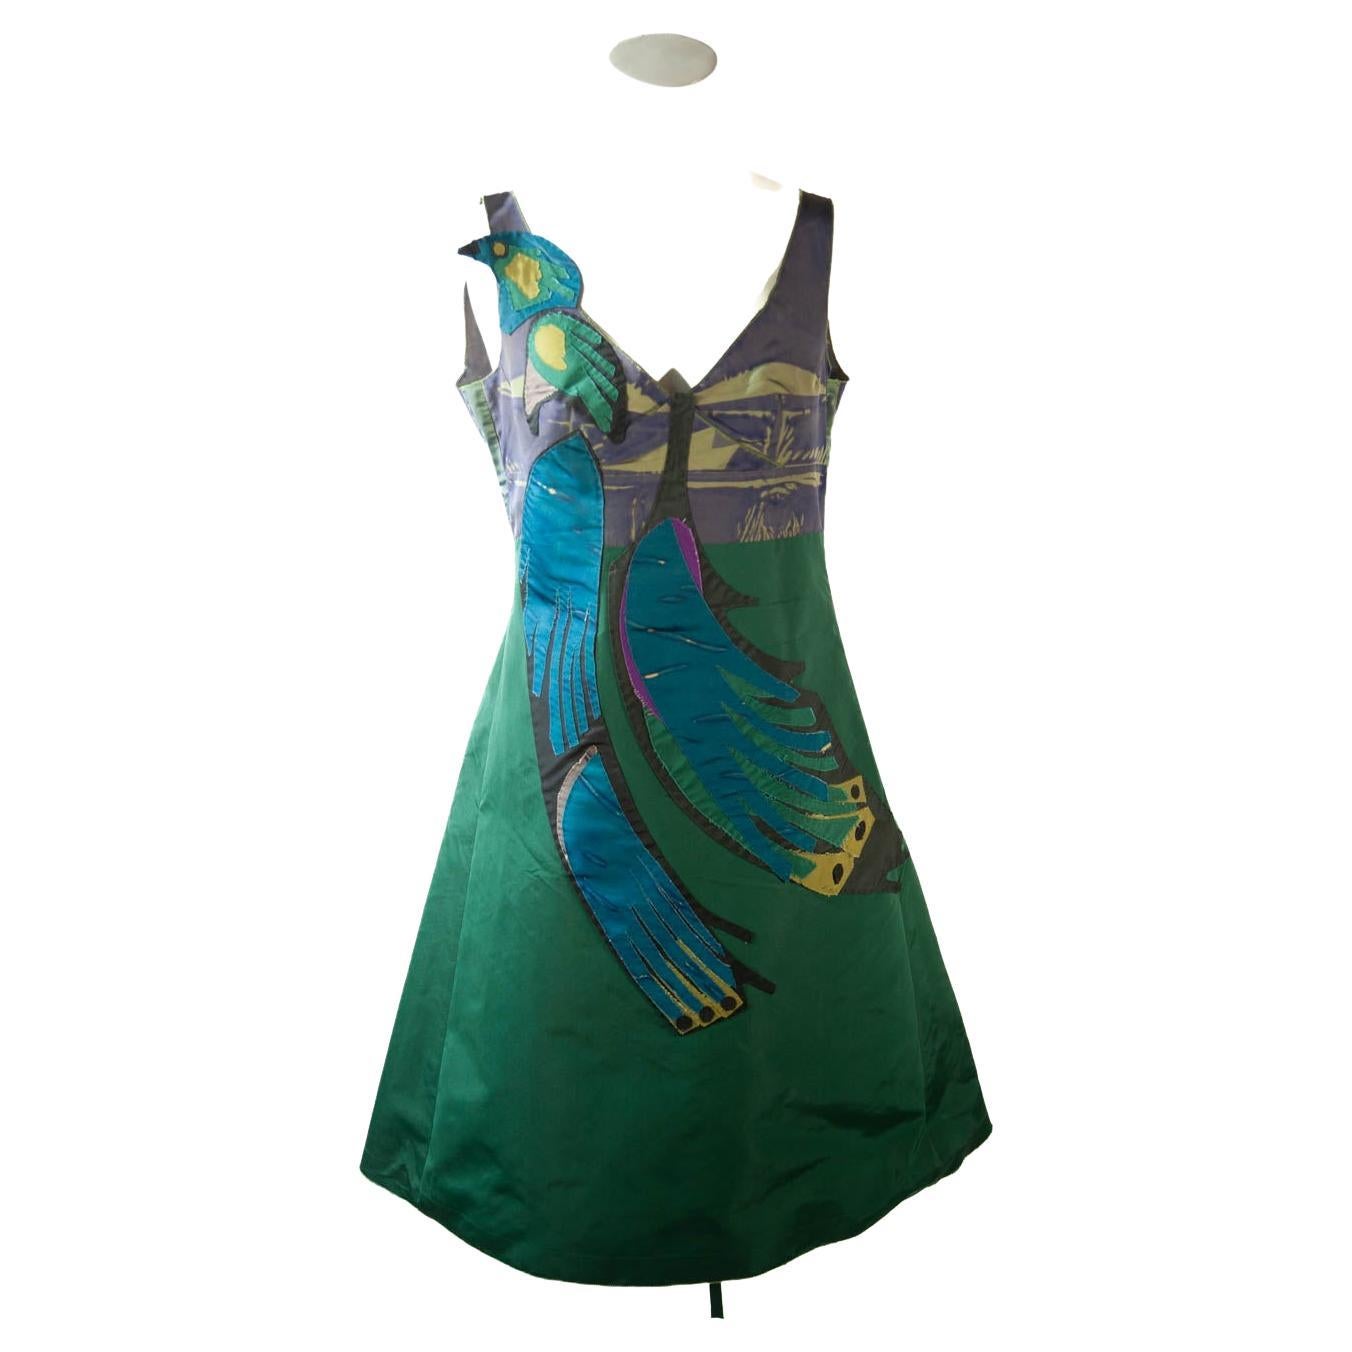 Prada, Silk Peacock Appliqué, Limited Ed. Runway Collection Dress, S/S 2005 For Sale